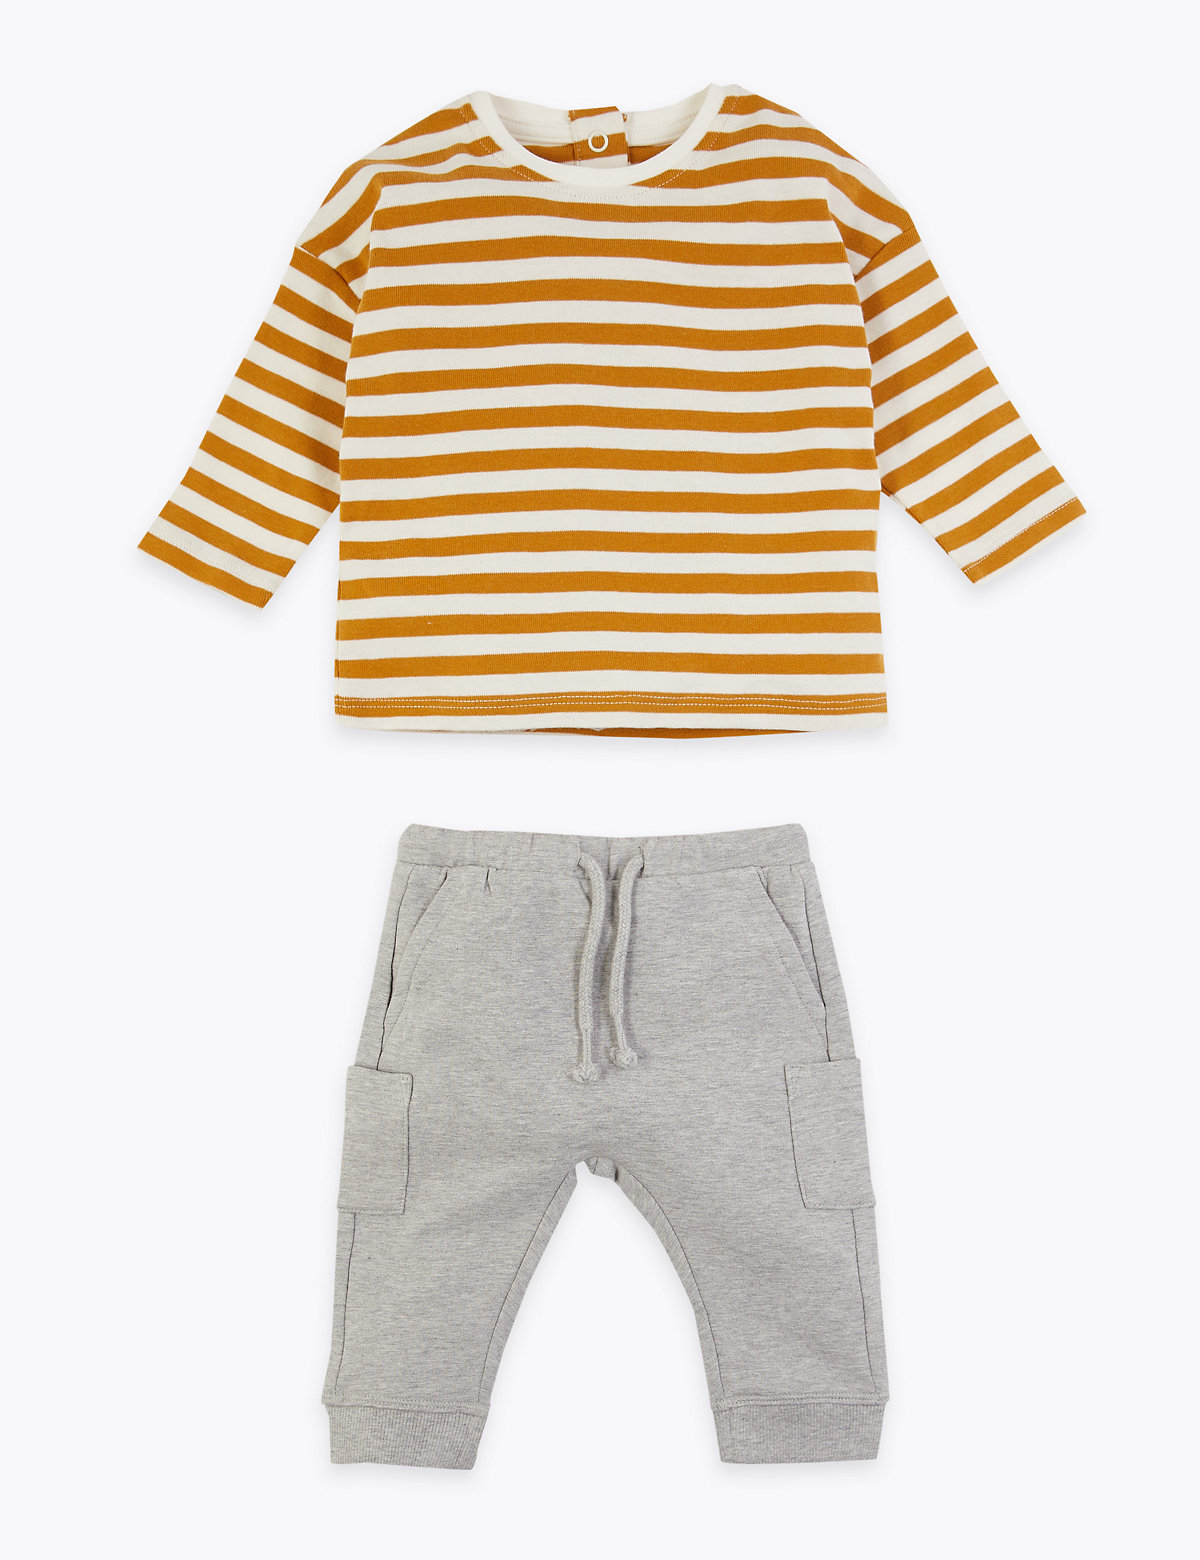 2 Piece Cotton Striped Outfit (0-3 Years)